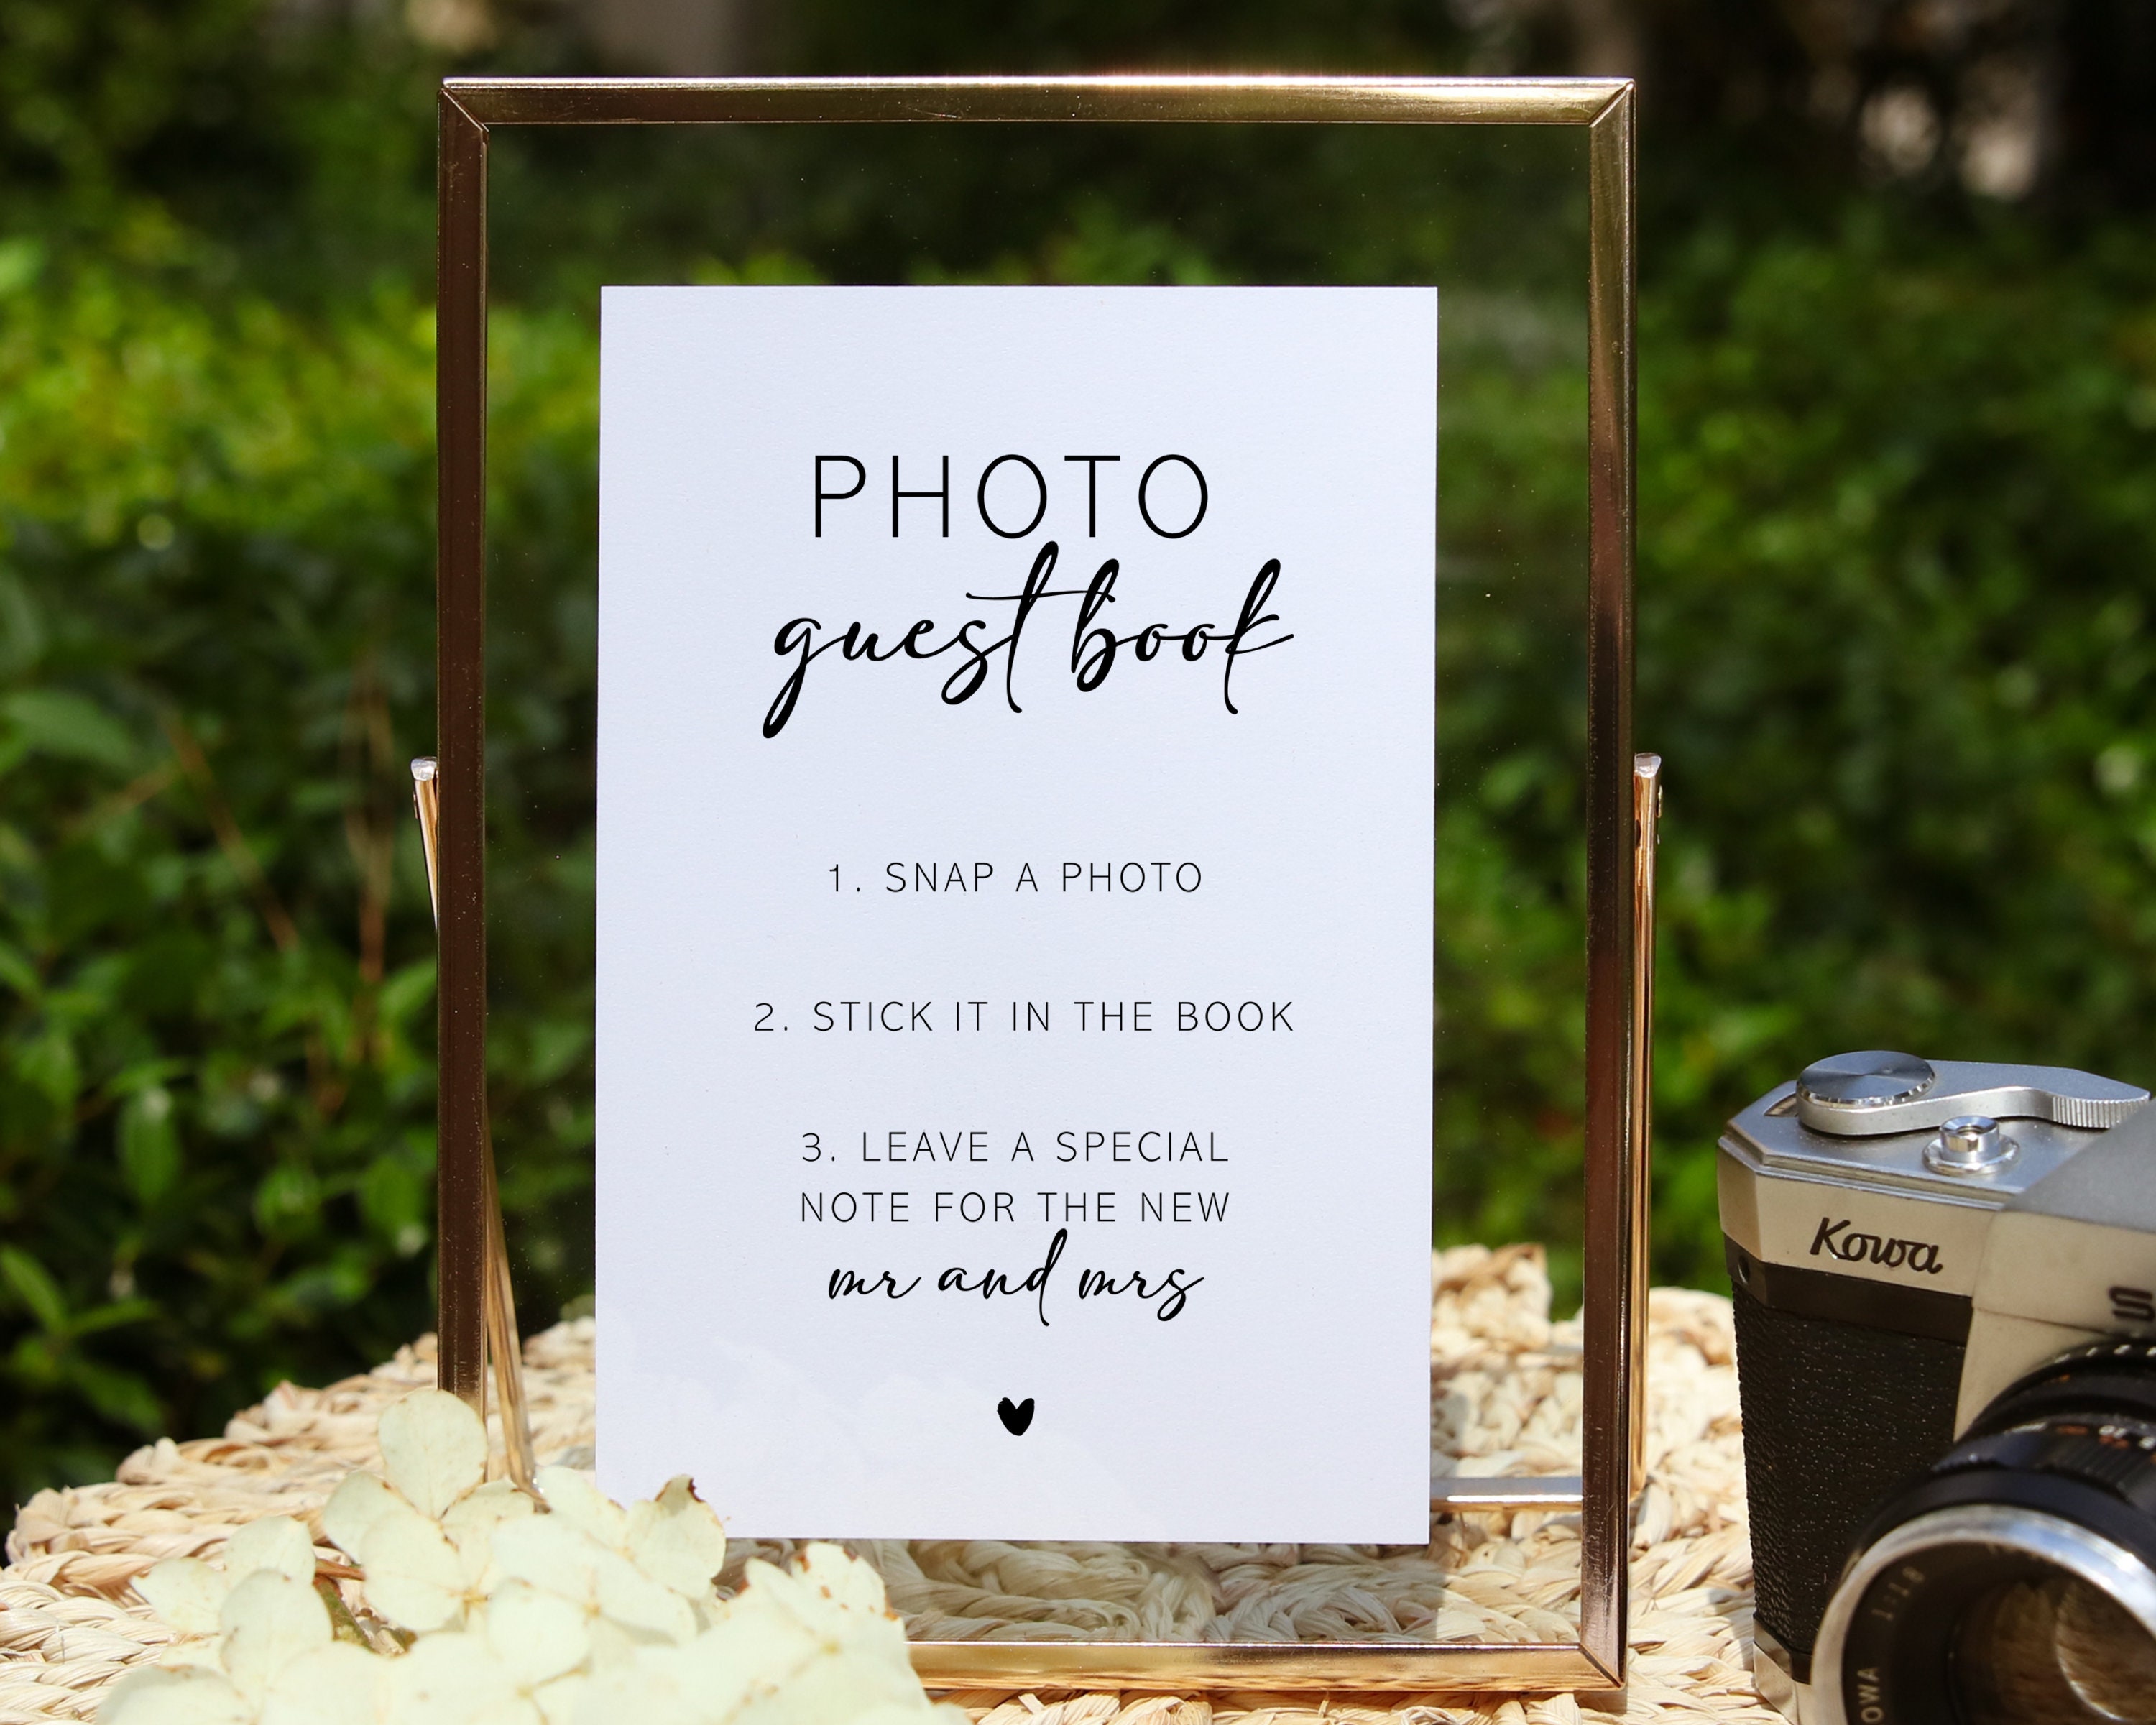 Polaroid Guest Book - wedding sign, available digitally or printed